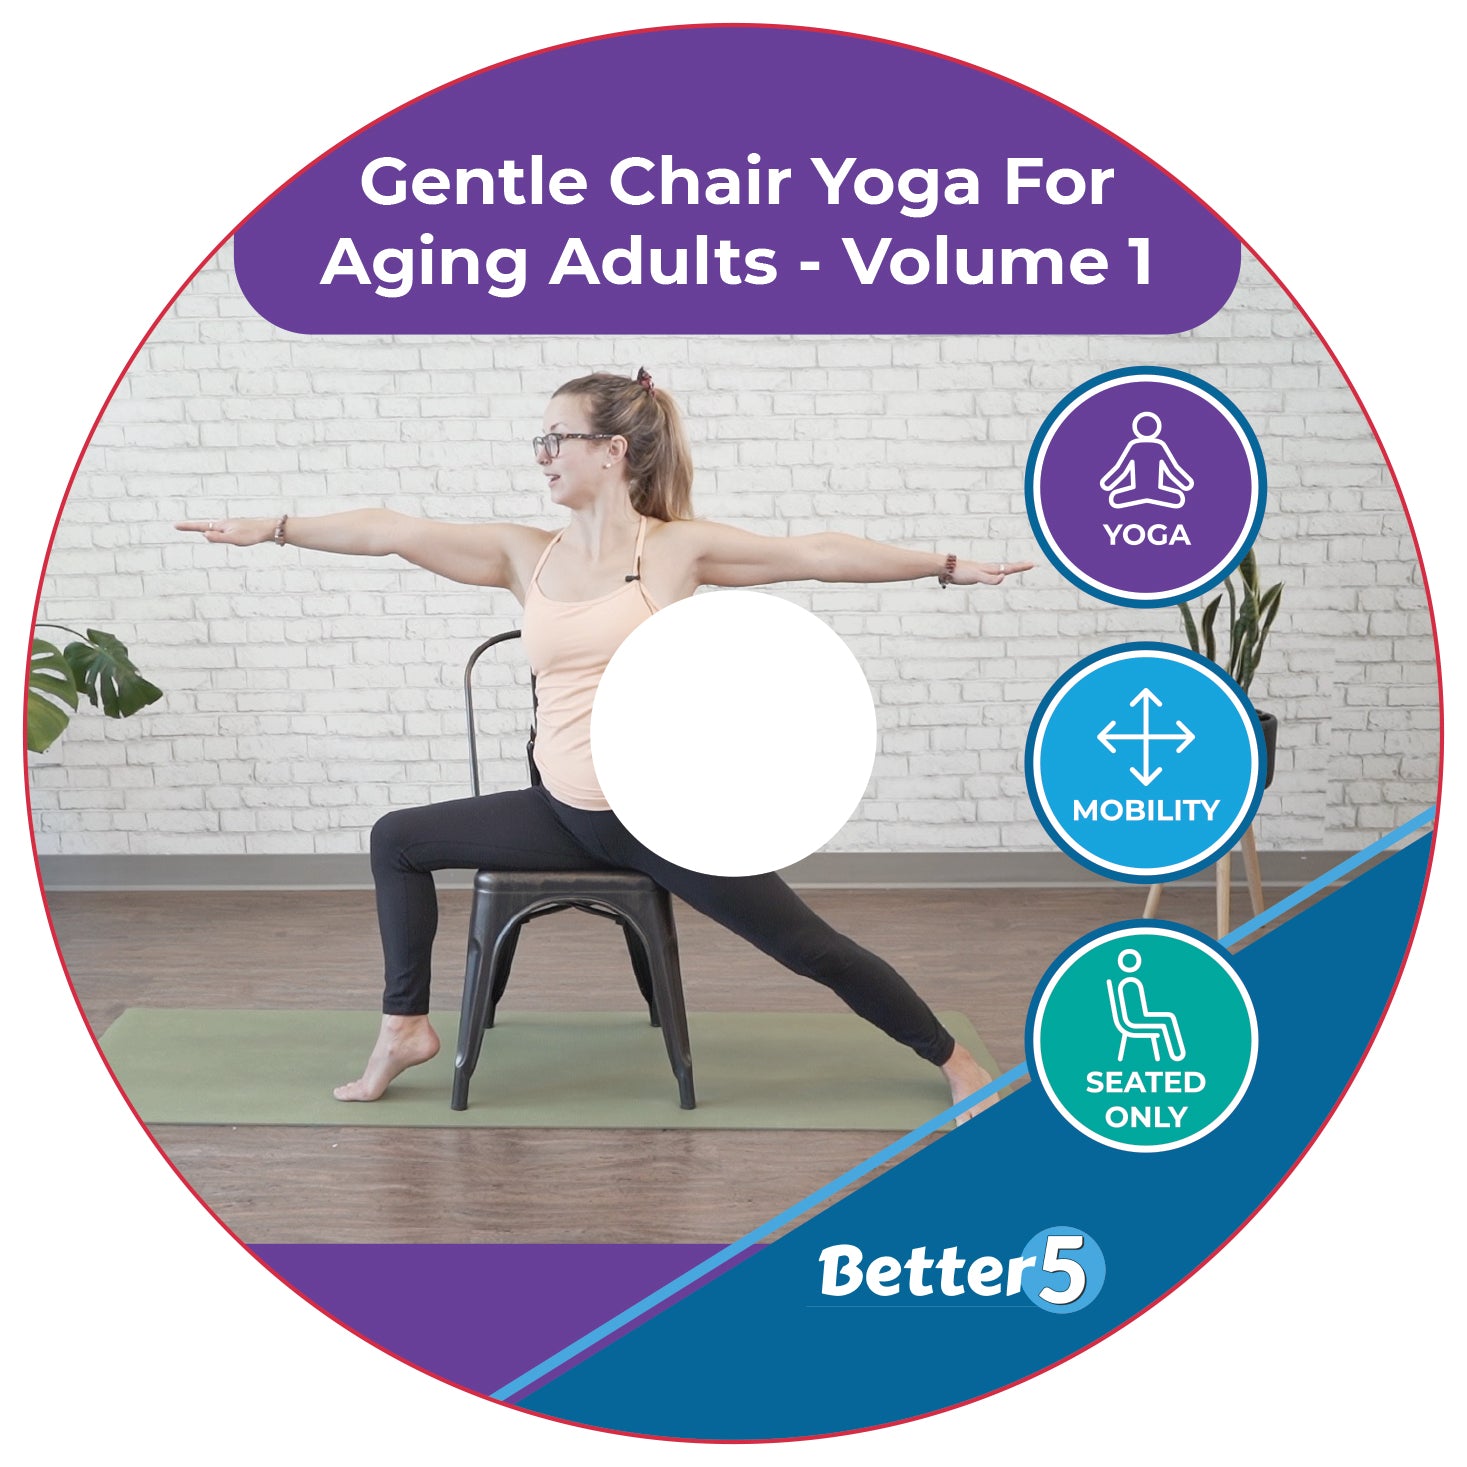 Gentle Chair Yoga For Aging Adults - Volume 1 DVD – Better5